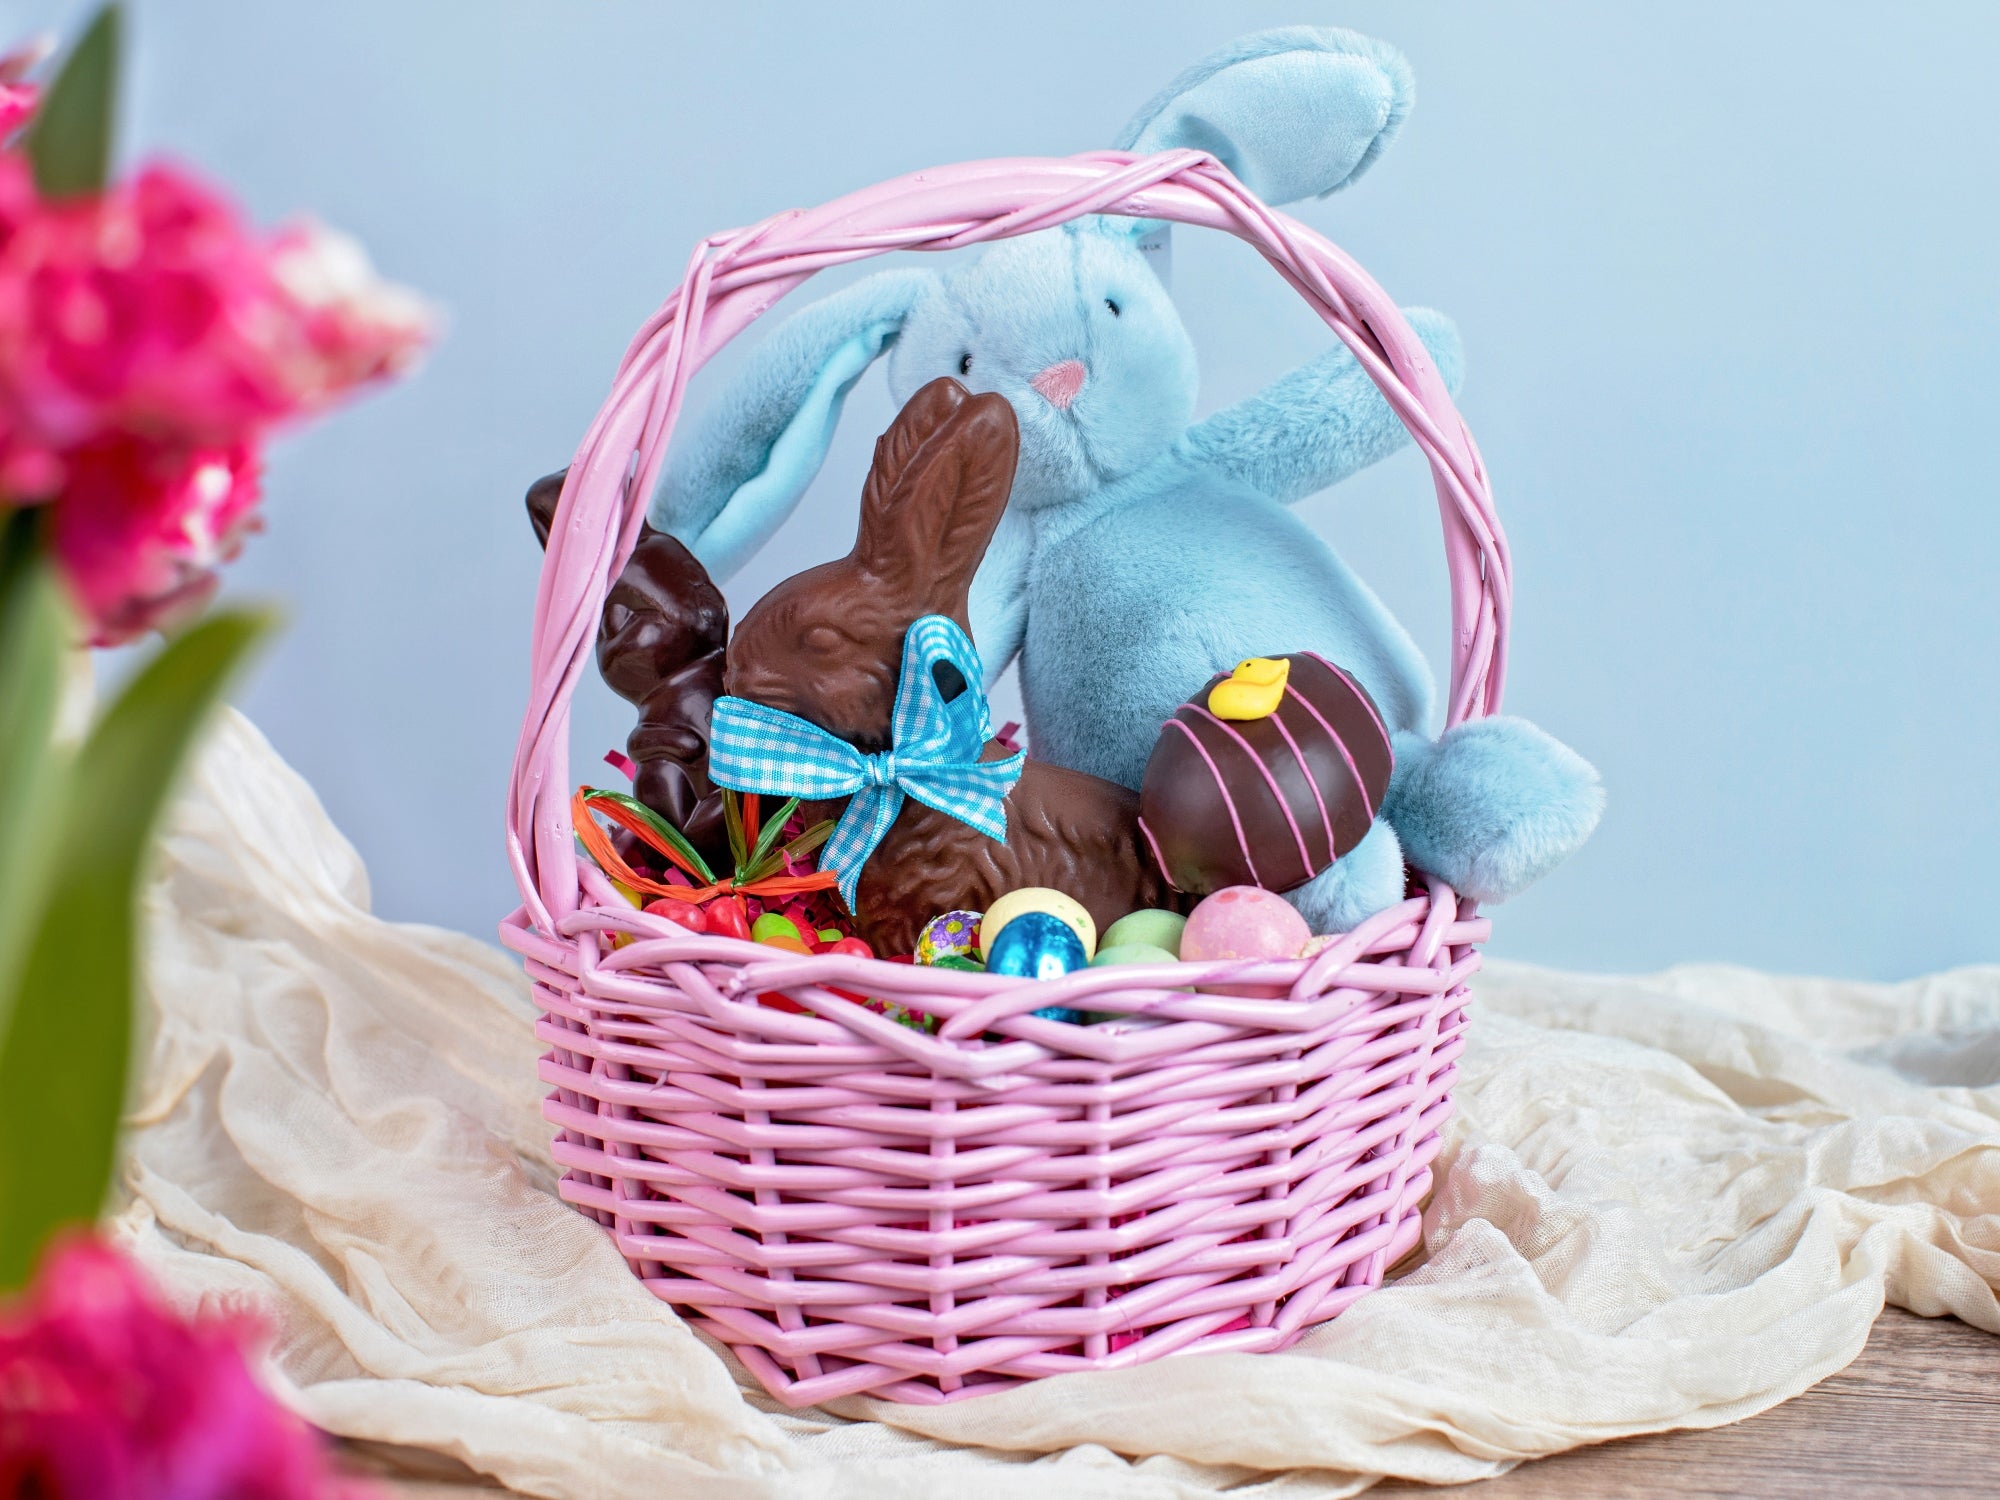 Classic Chocolate Easter Basket (7 items)